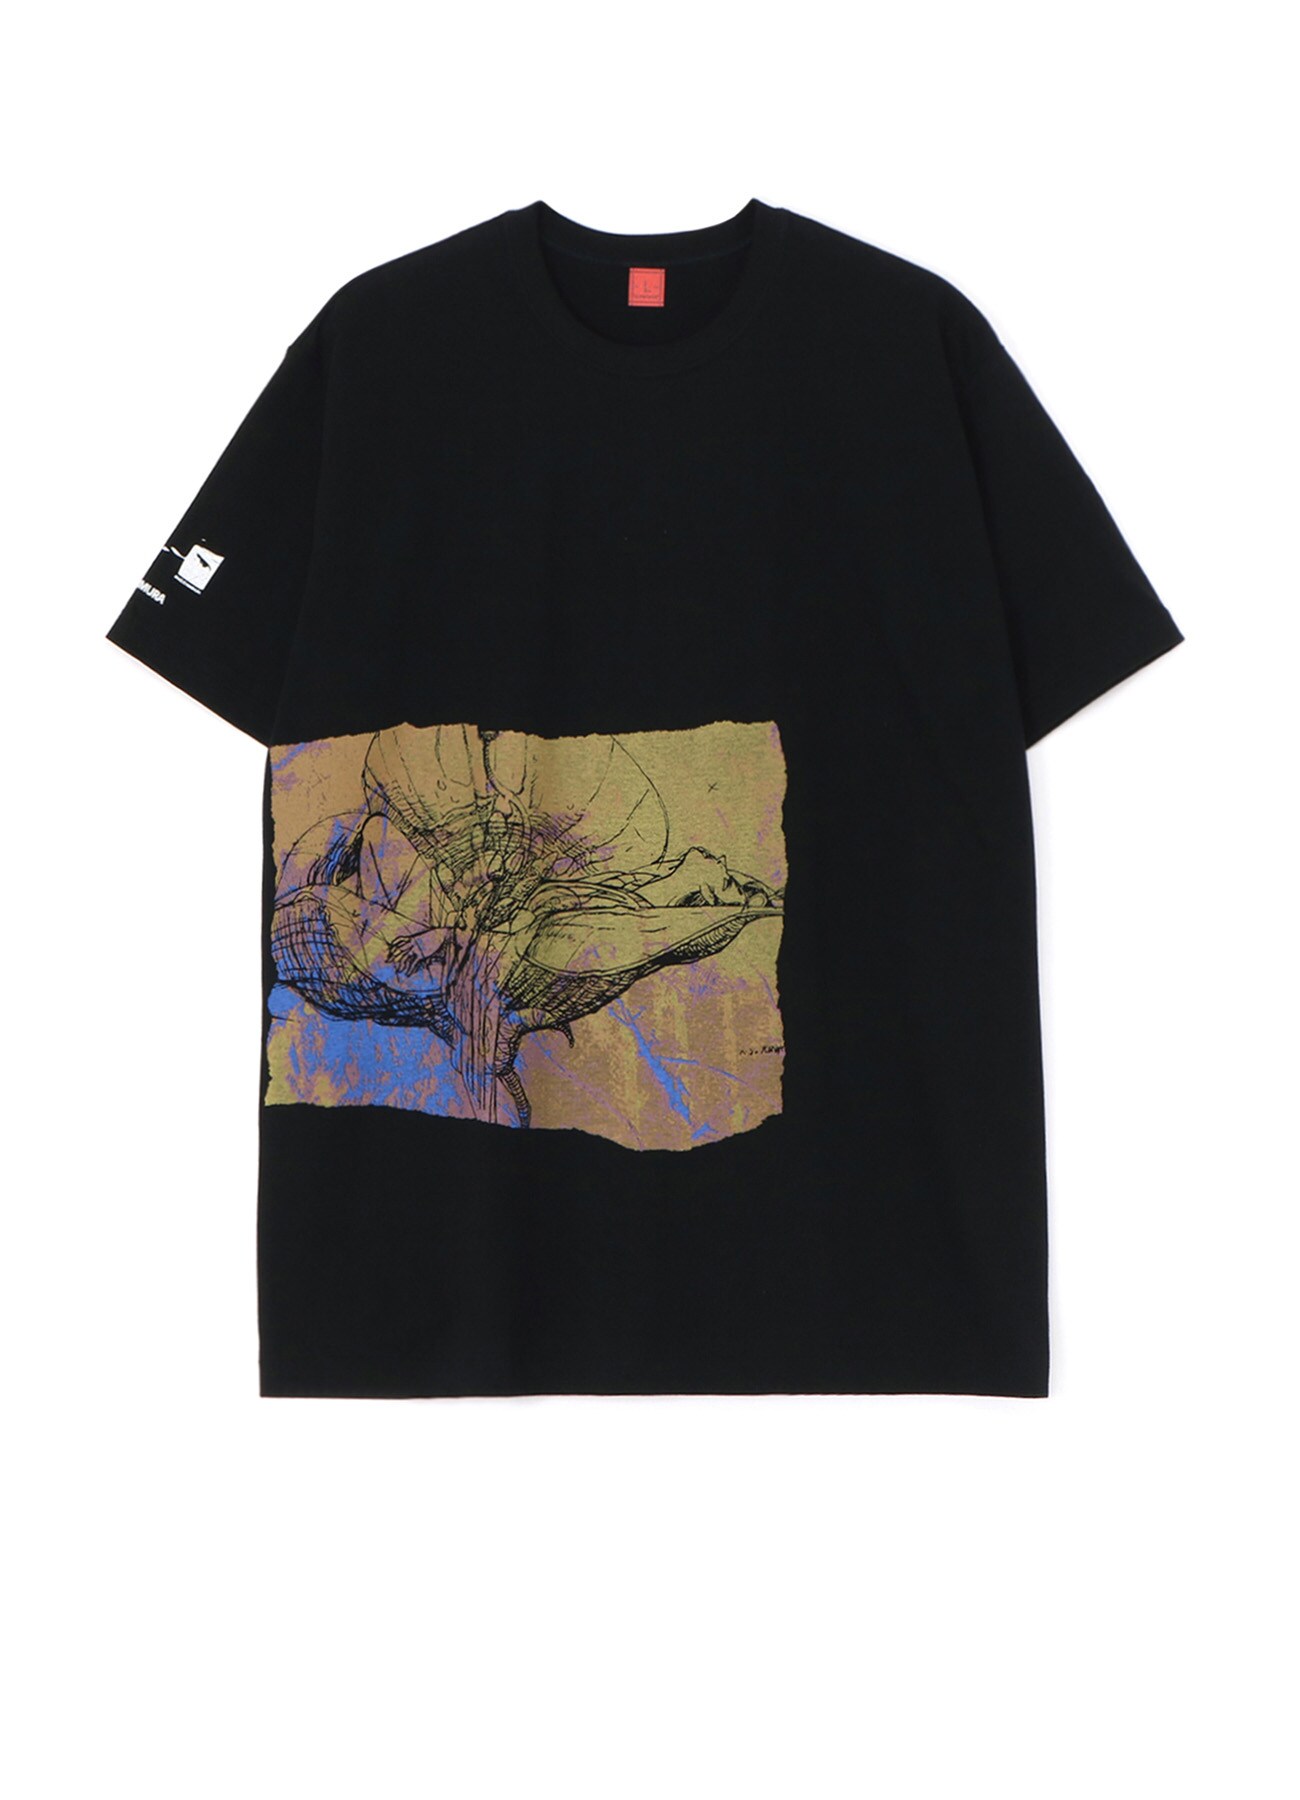 S'YTE x KAZUO KAMIMURA-幻の一枚絵- COTTON JERSEY T-SHIRT WITH PRINTED ILLUSTRATION